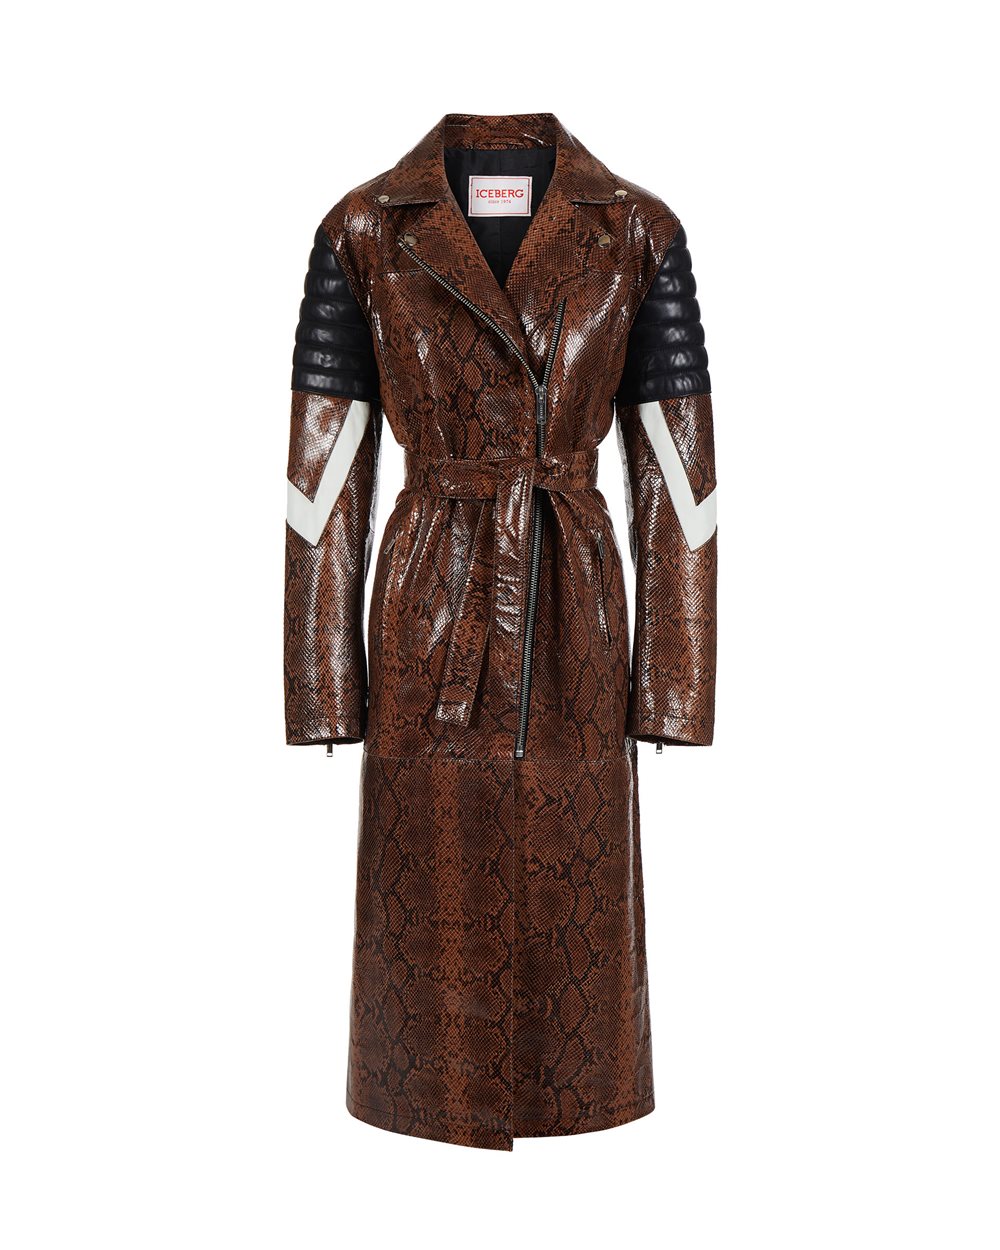 Snake print eco-leather trench coat - Fashion Show Woman | Iceberg - Official Website